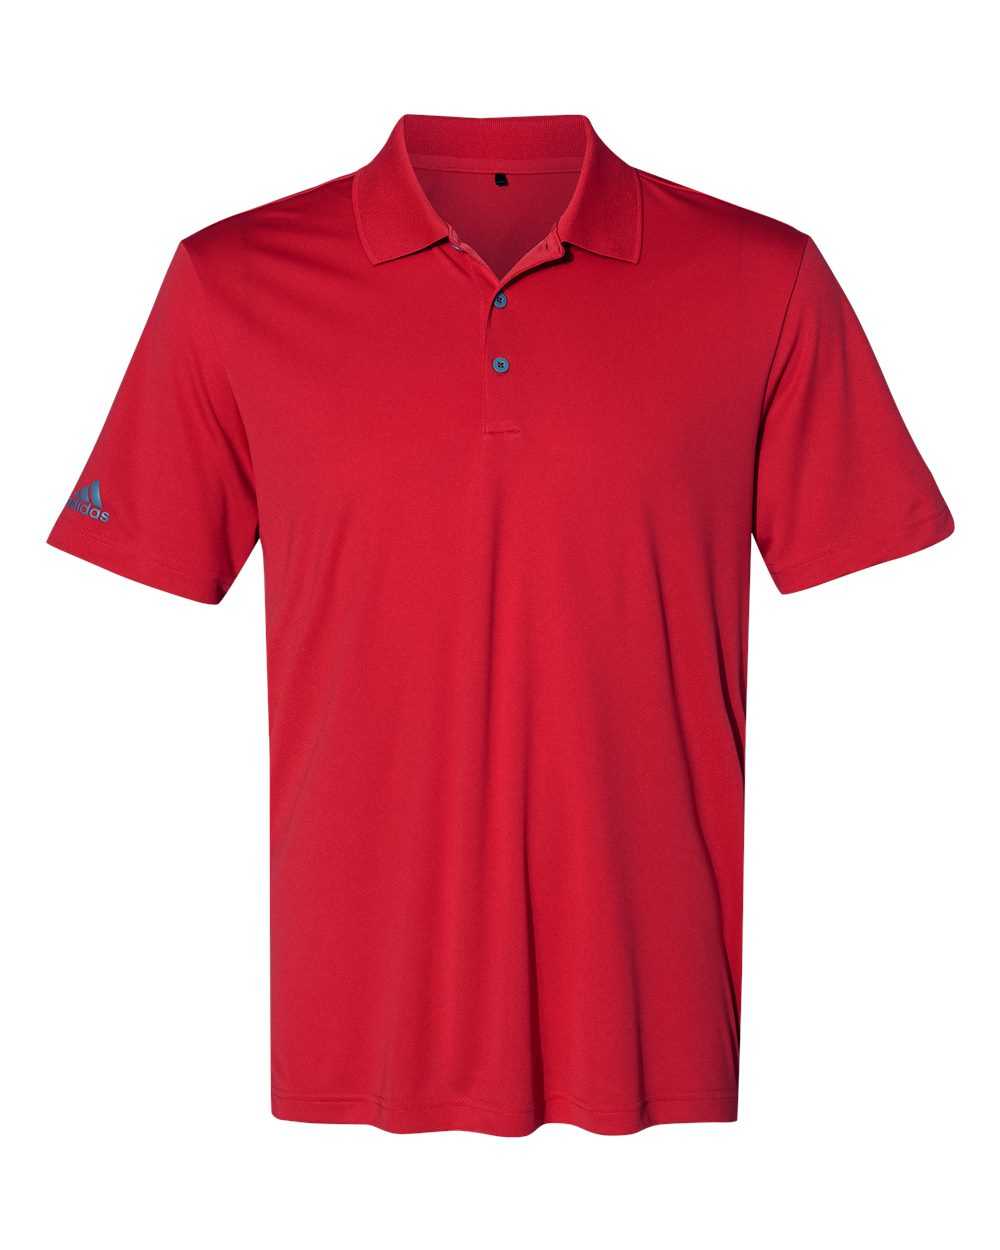 Adidas A230 Performance Sport Shirt - Collegiate Red - HIT a Double